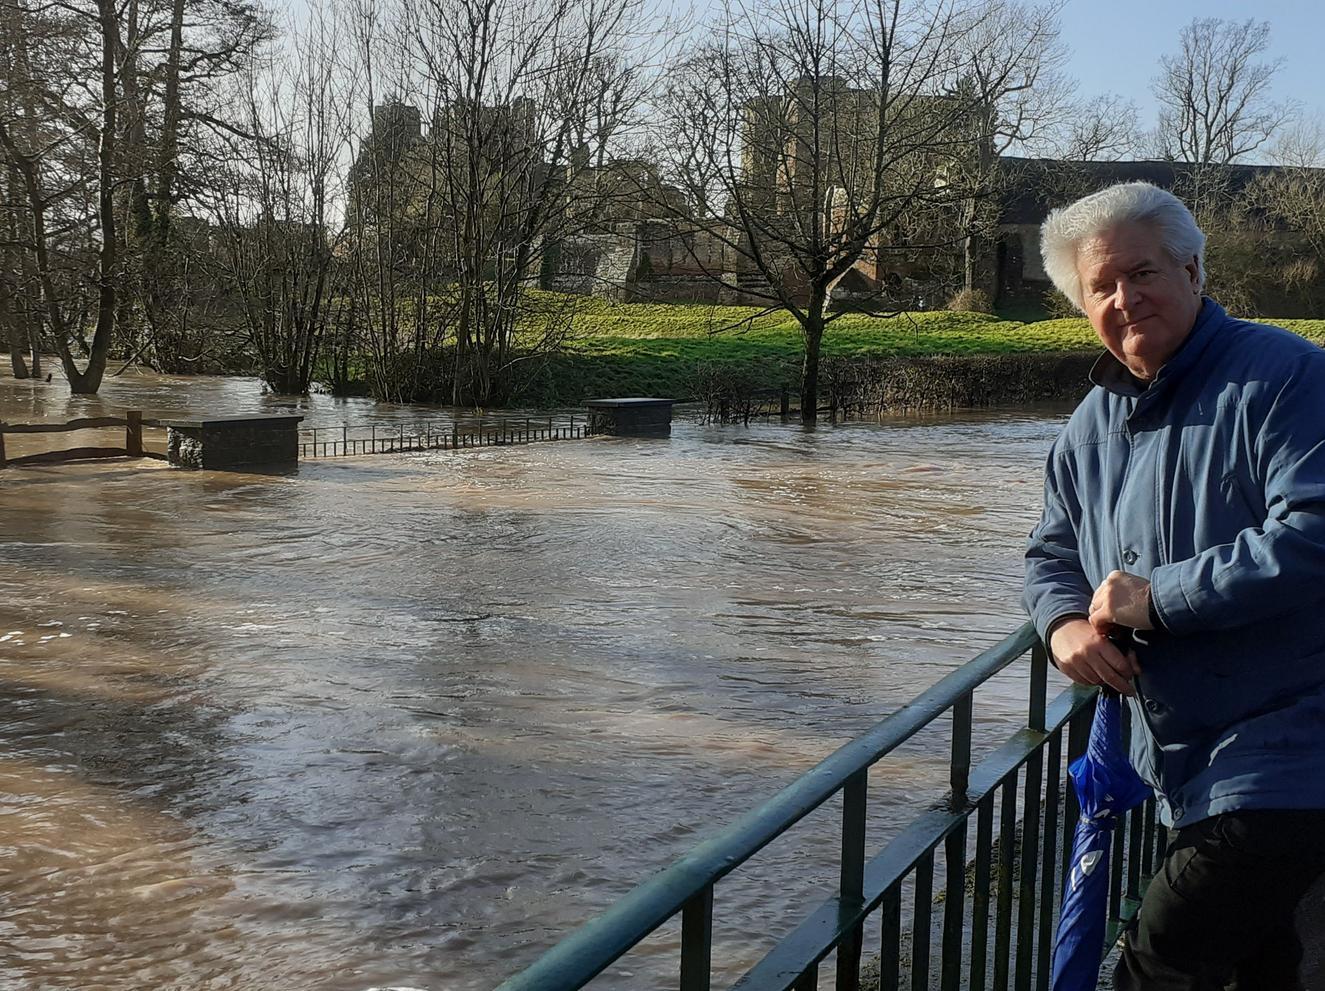 Mark Taylor stands in front of the flooded ford with Kenilworth Castle in the background (photo by Helen Taylor)